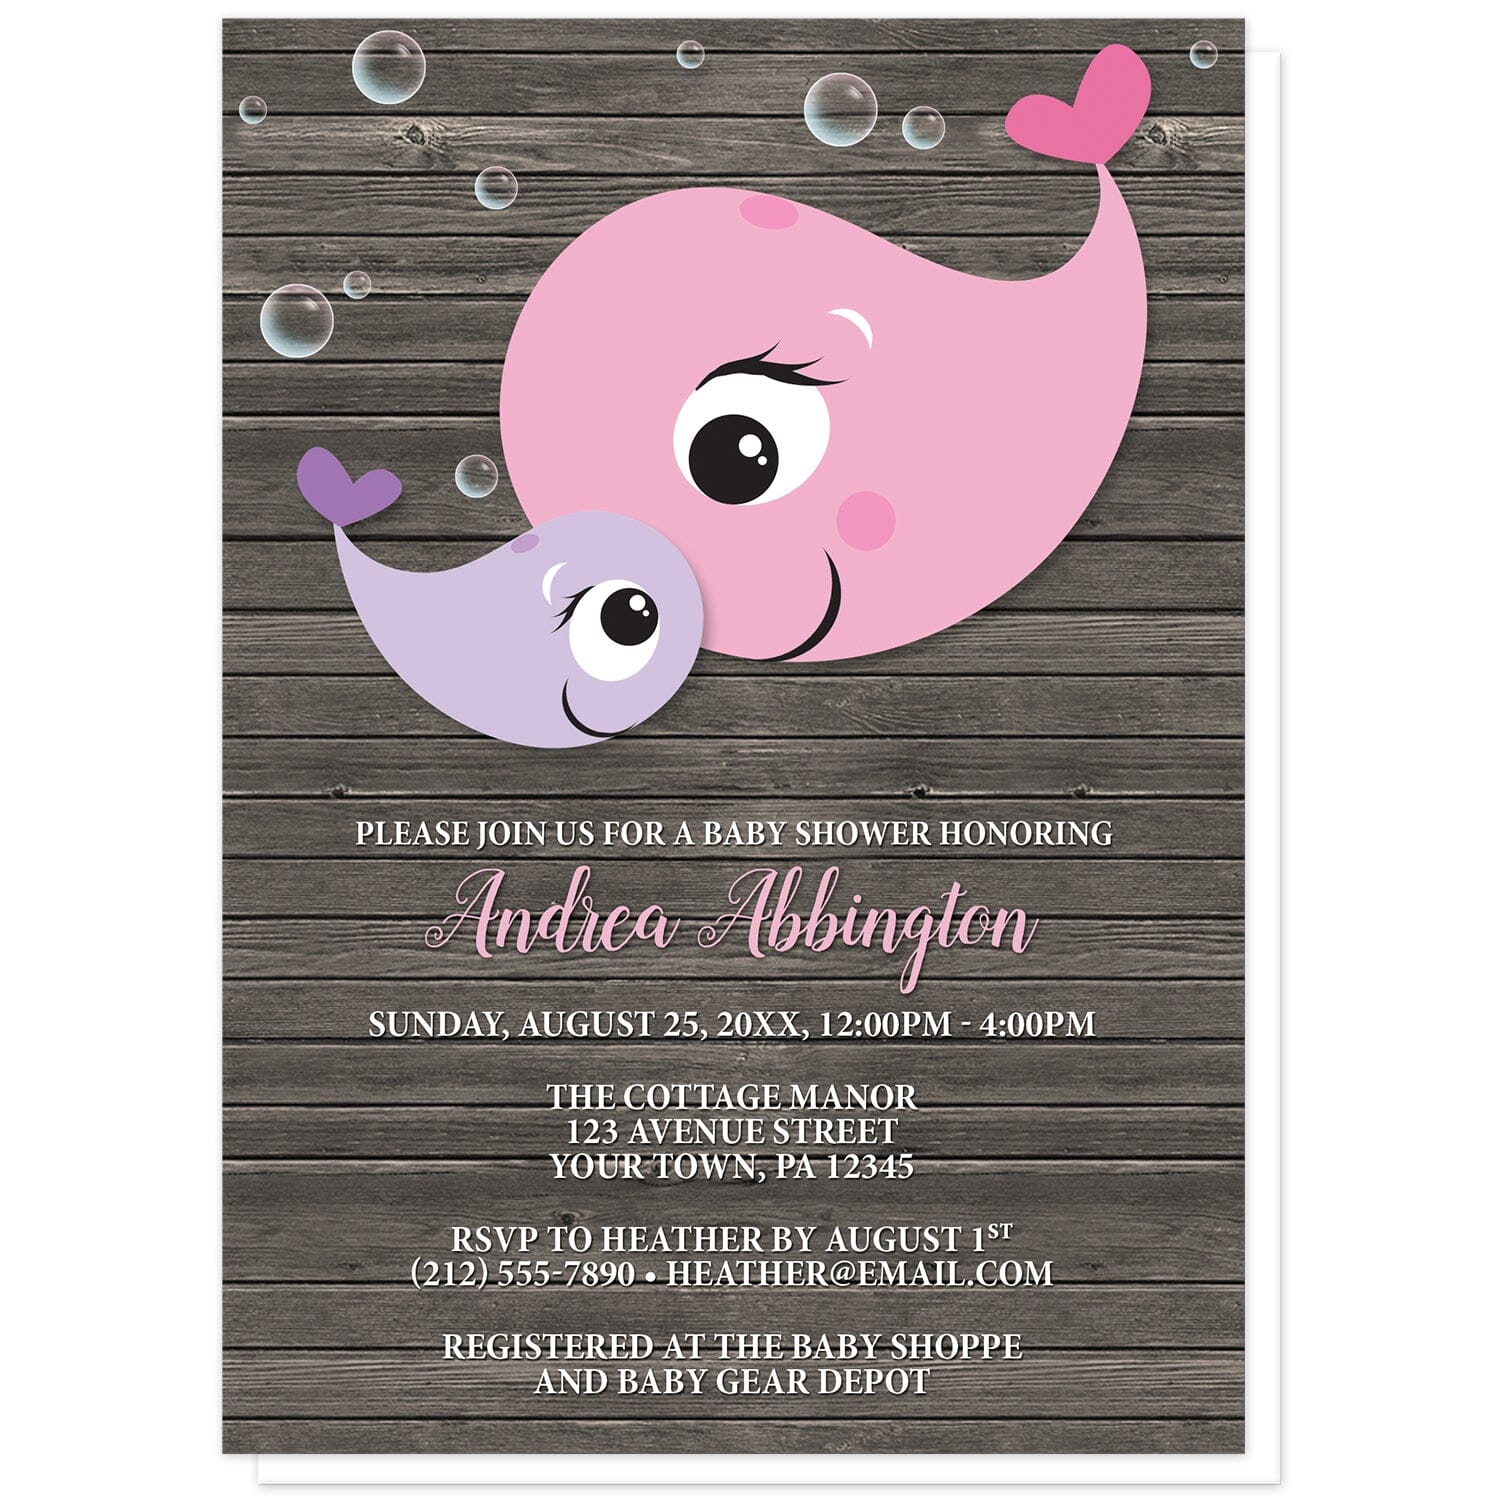 Mommy Baby Girl Whale Rustic Wood Baby Shower Invitations at Artistically Invited. Mommy baby girl whale rustic wood baby shower invitations with a cute illustration of a pink mommy whale and purple baby whale with translucent bubbles around them, over a dark brown wood background. Your personalized baby shower celebration details are custom printed in white with the mom-to-be's name printed in a pink script font over the wood background.